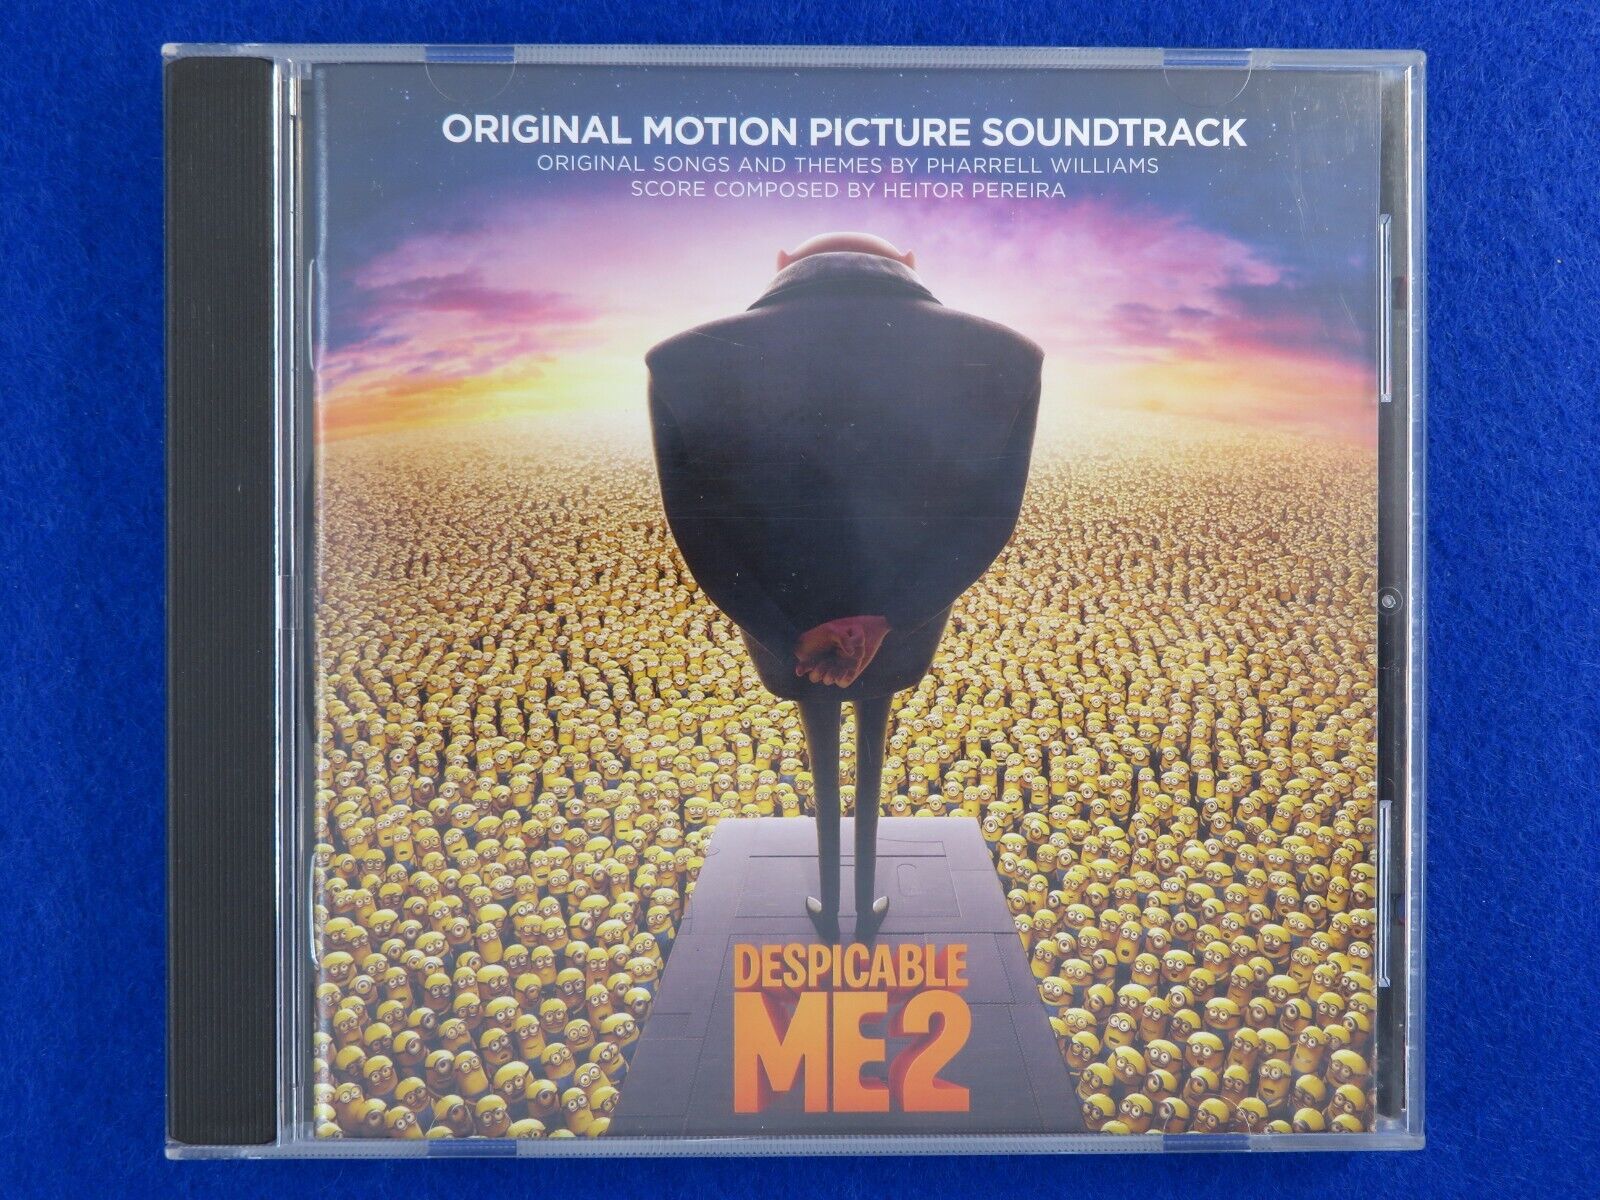 Despicable Me 2 Motion Picture Soundtrack - CD - Fast Postage 